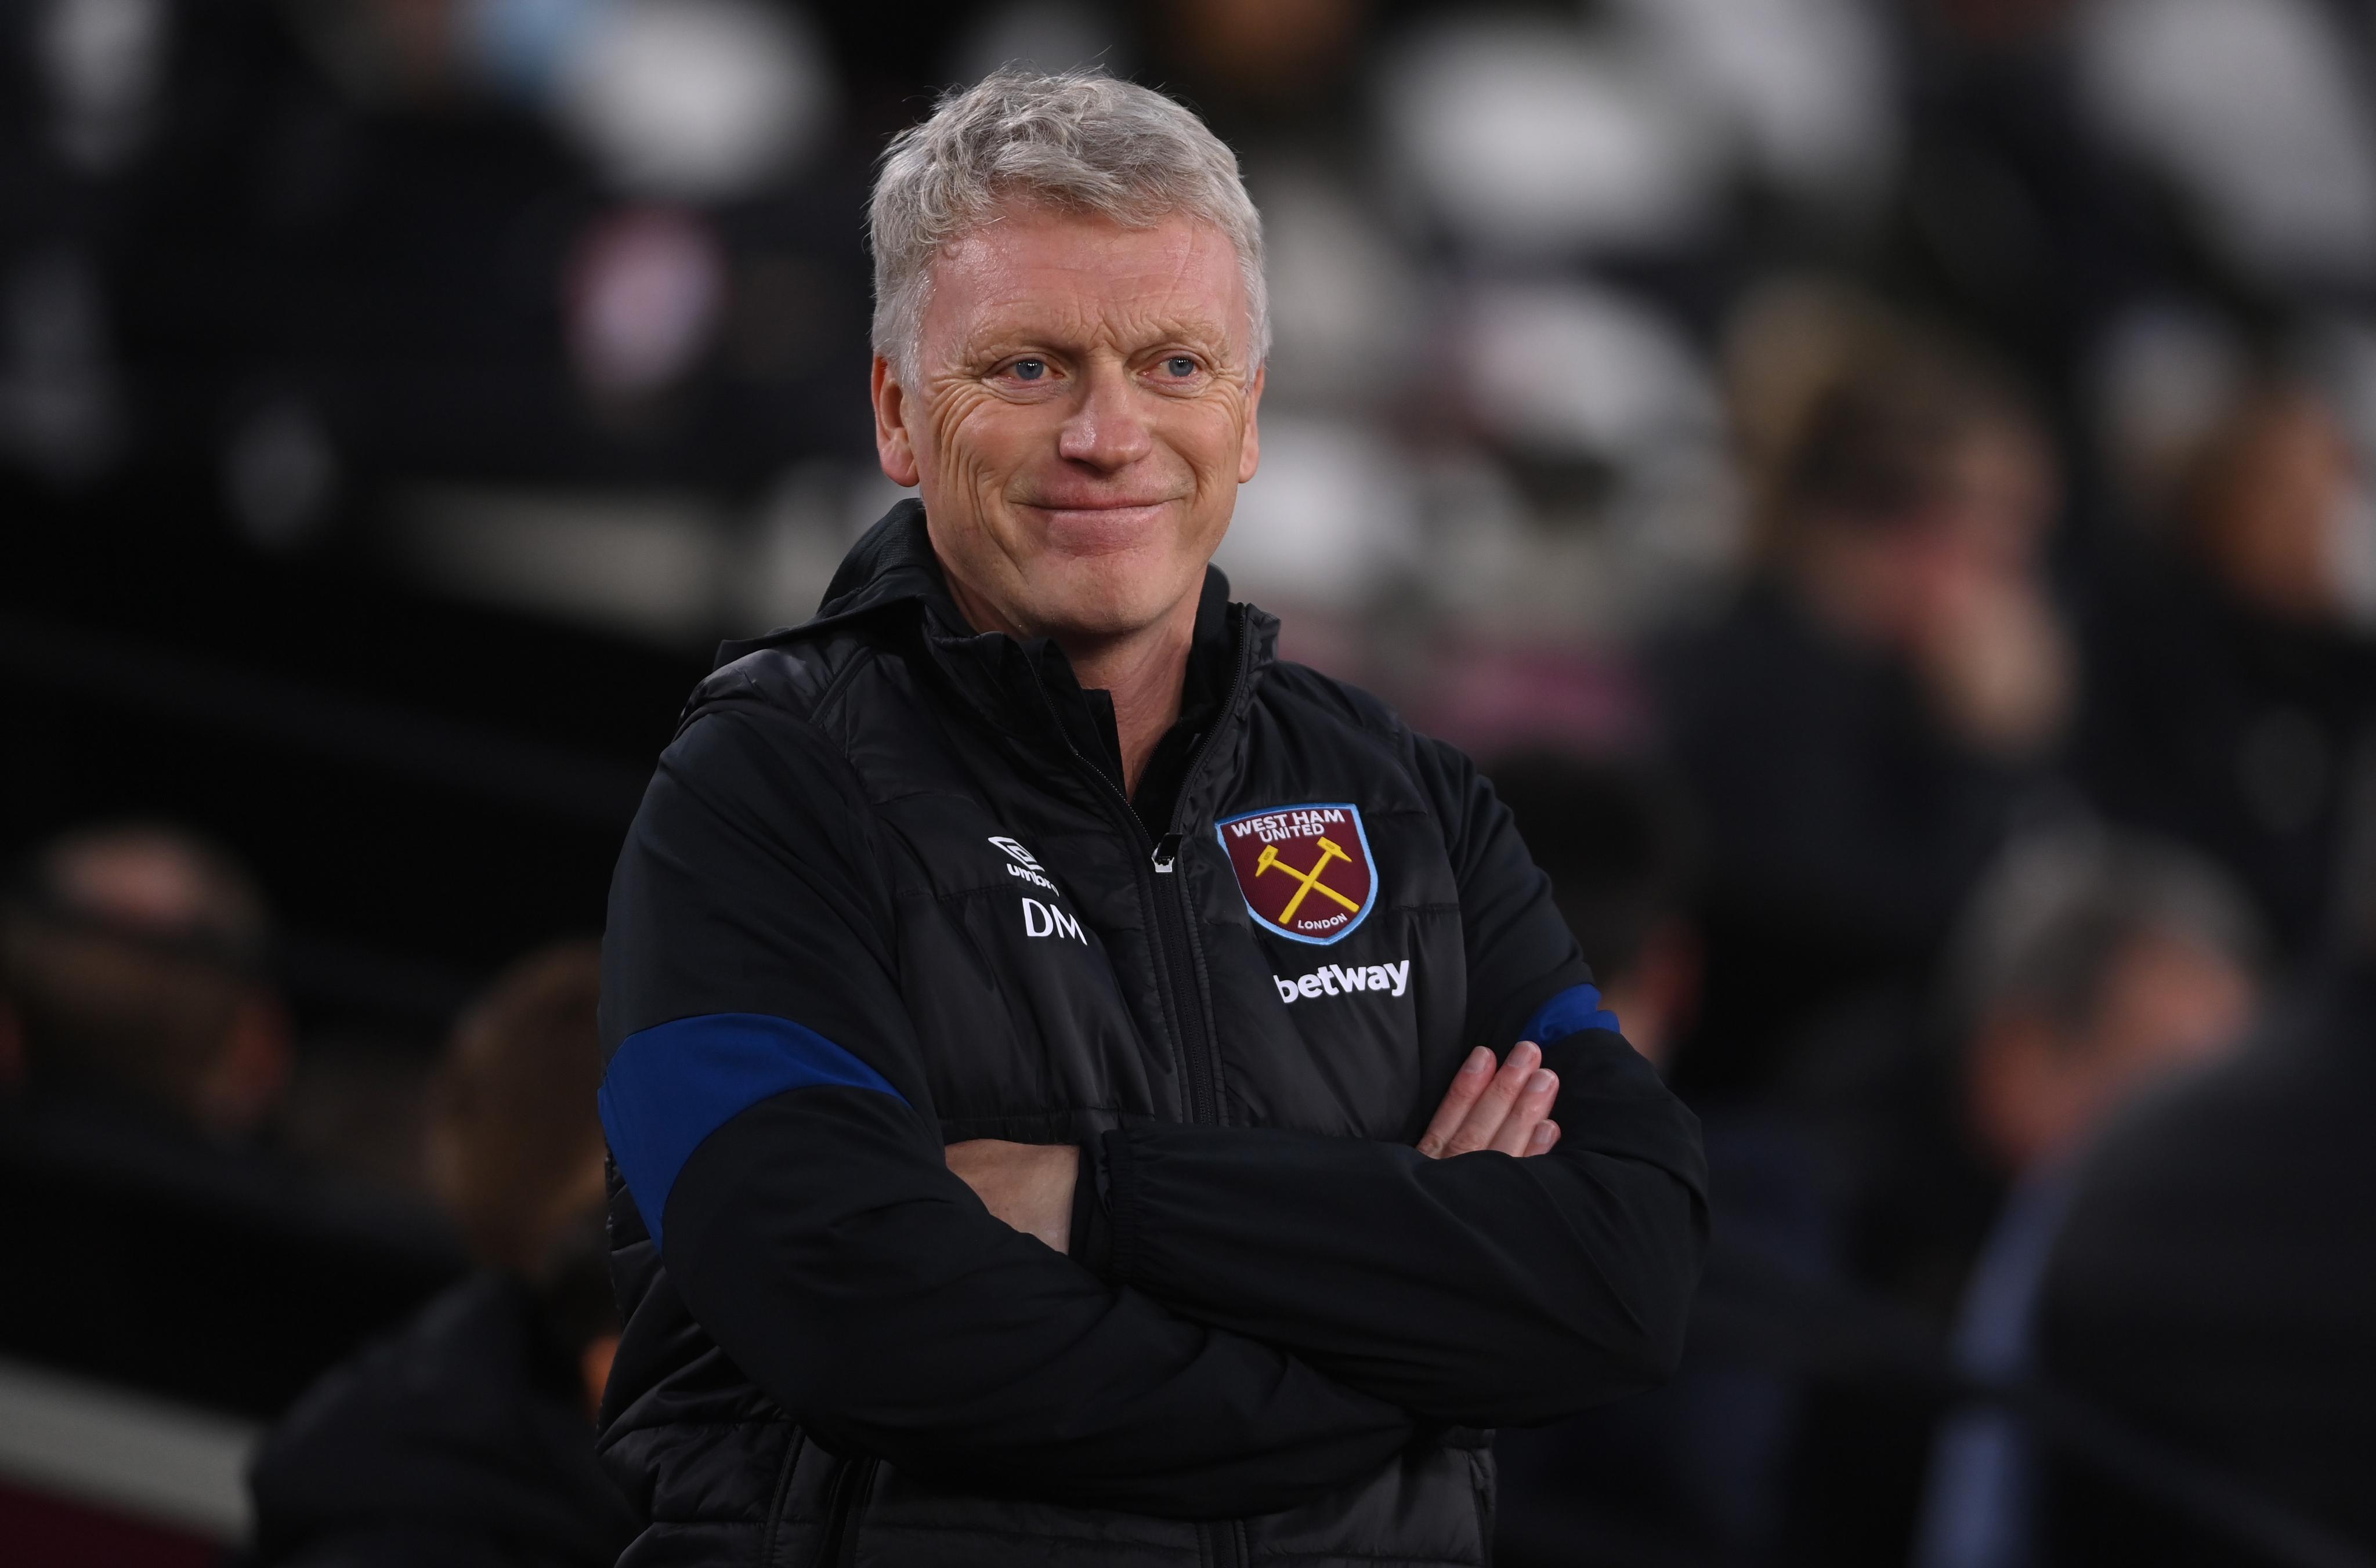 Did not agree on why we had to play Norwich when we did, asserts David Moyes